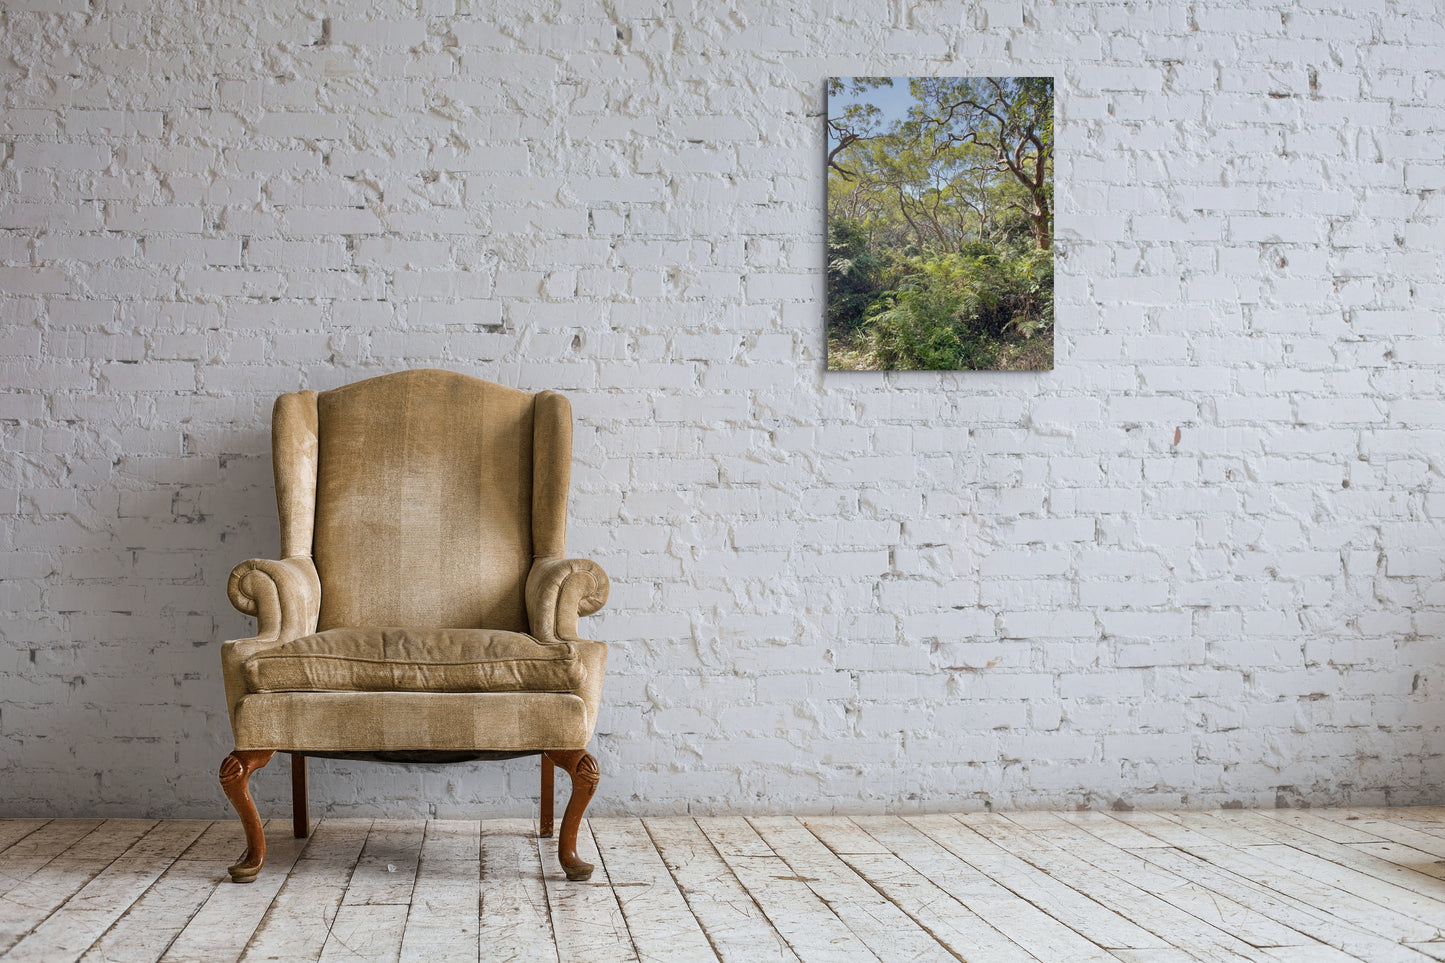 Rainforest Canvas Wall Art in lounge room with white brick wall, brown chair and white floorboards